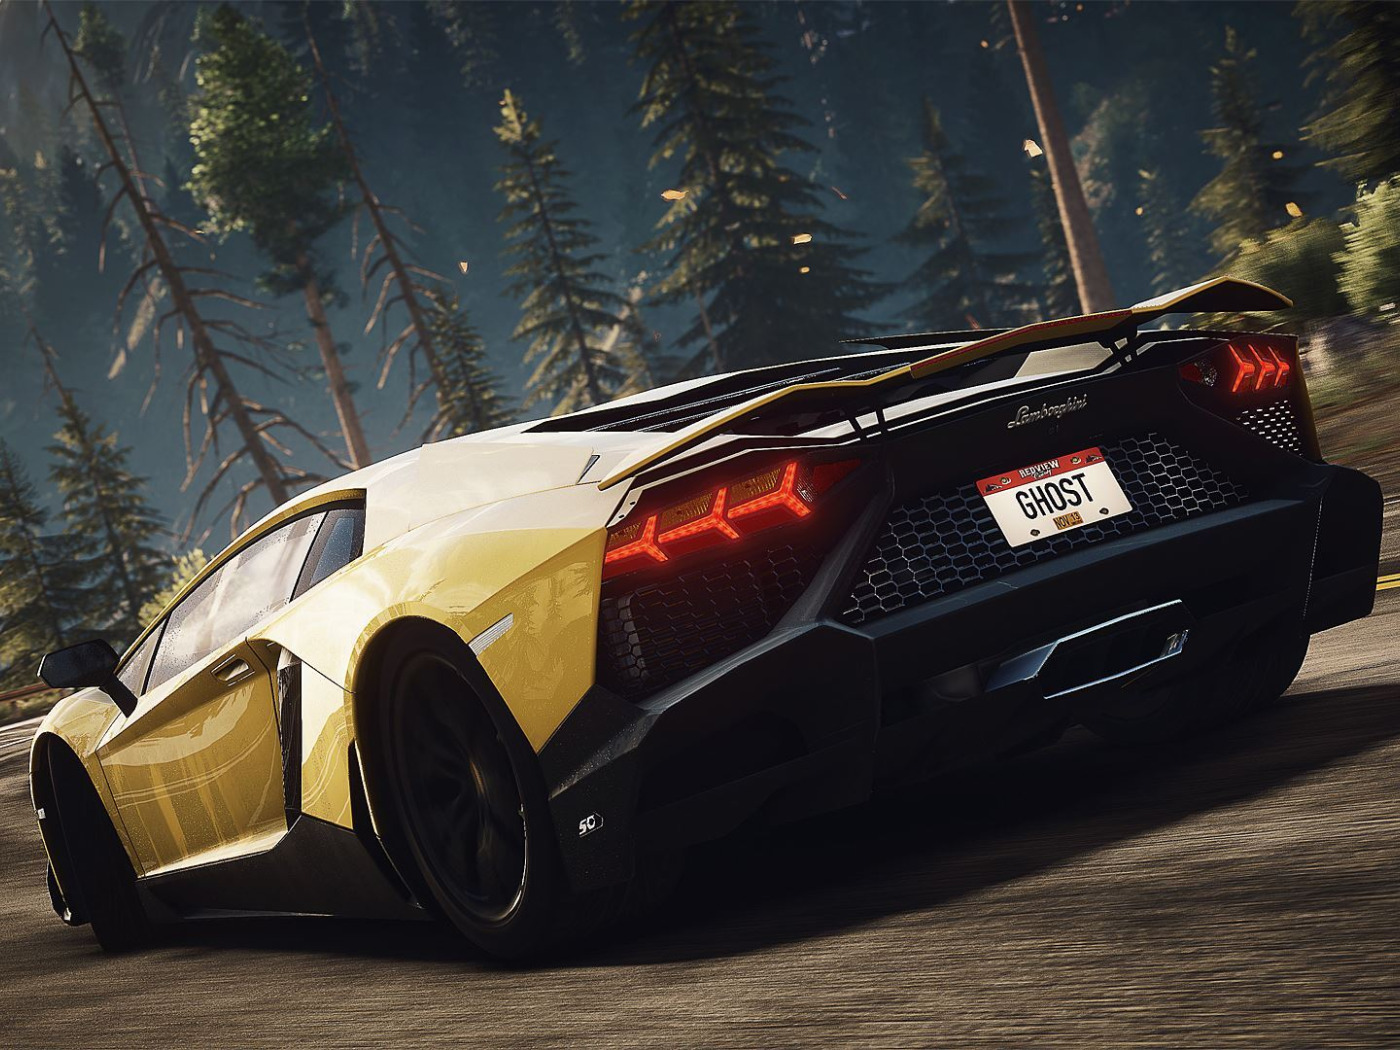 Lamborghini Aventador NFS 2015. Lamborghini Aventador NFS. Need for Speed Ламборджини. Lamborghini Aventador lp700-4 NFS Rivals. Игры машины нфс